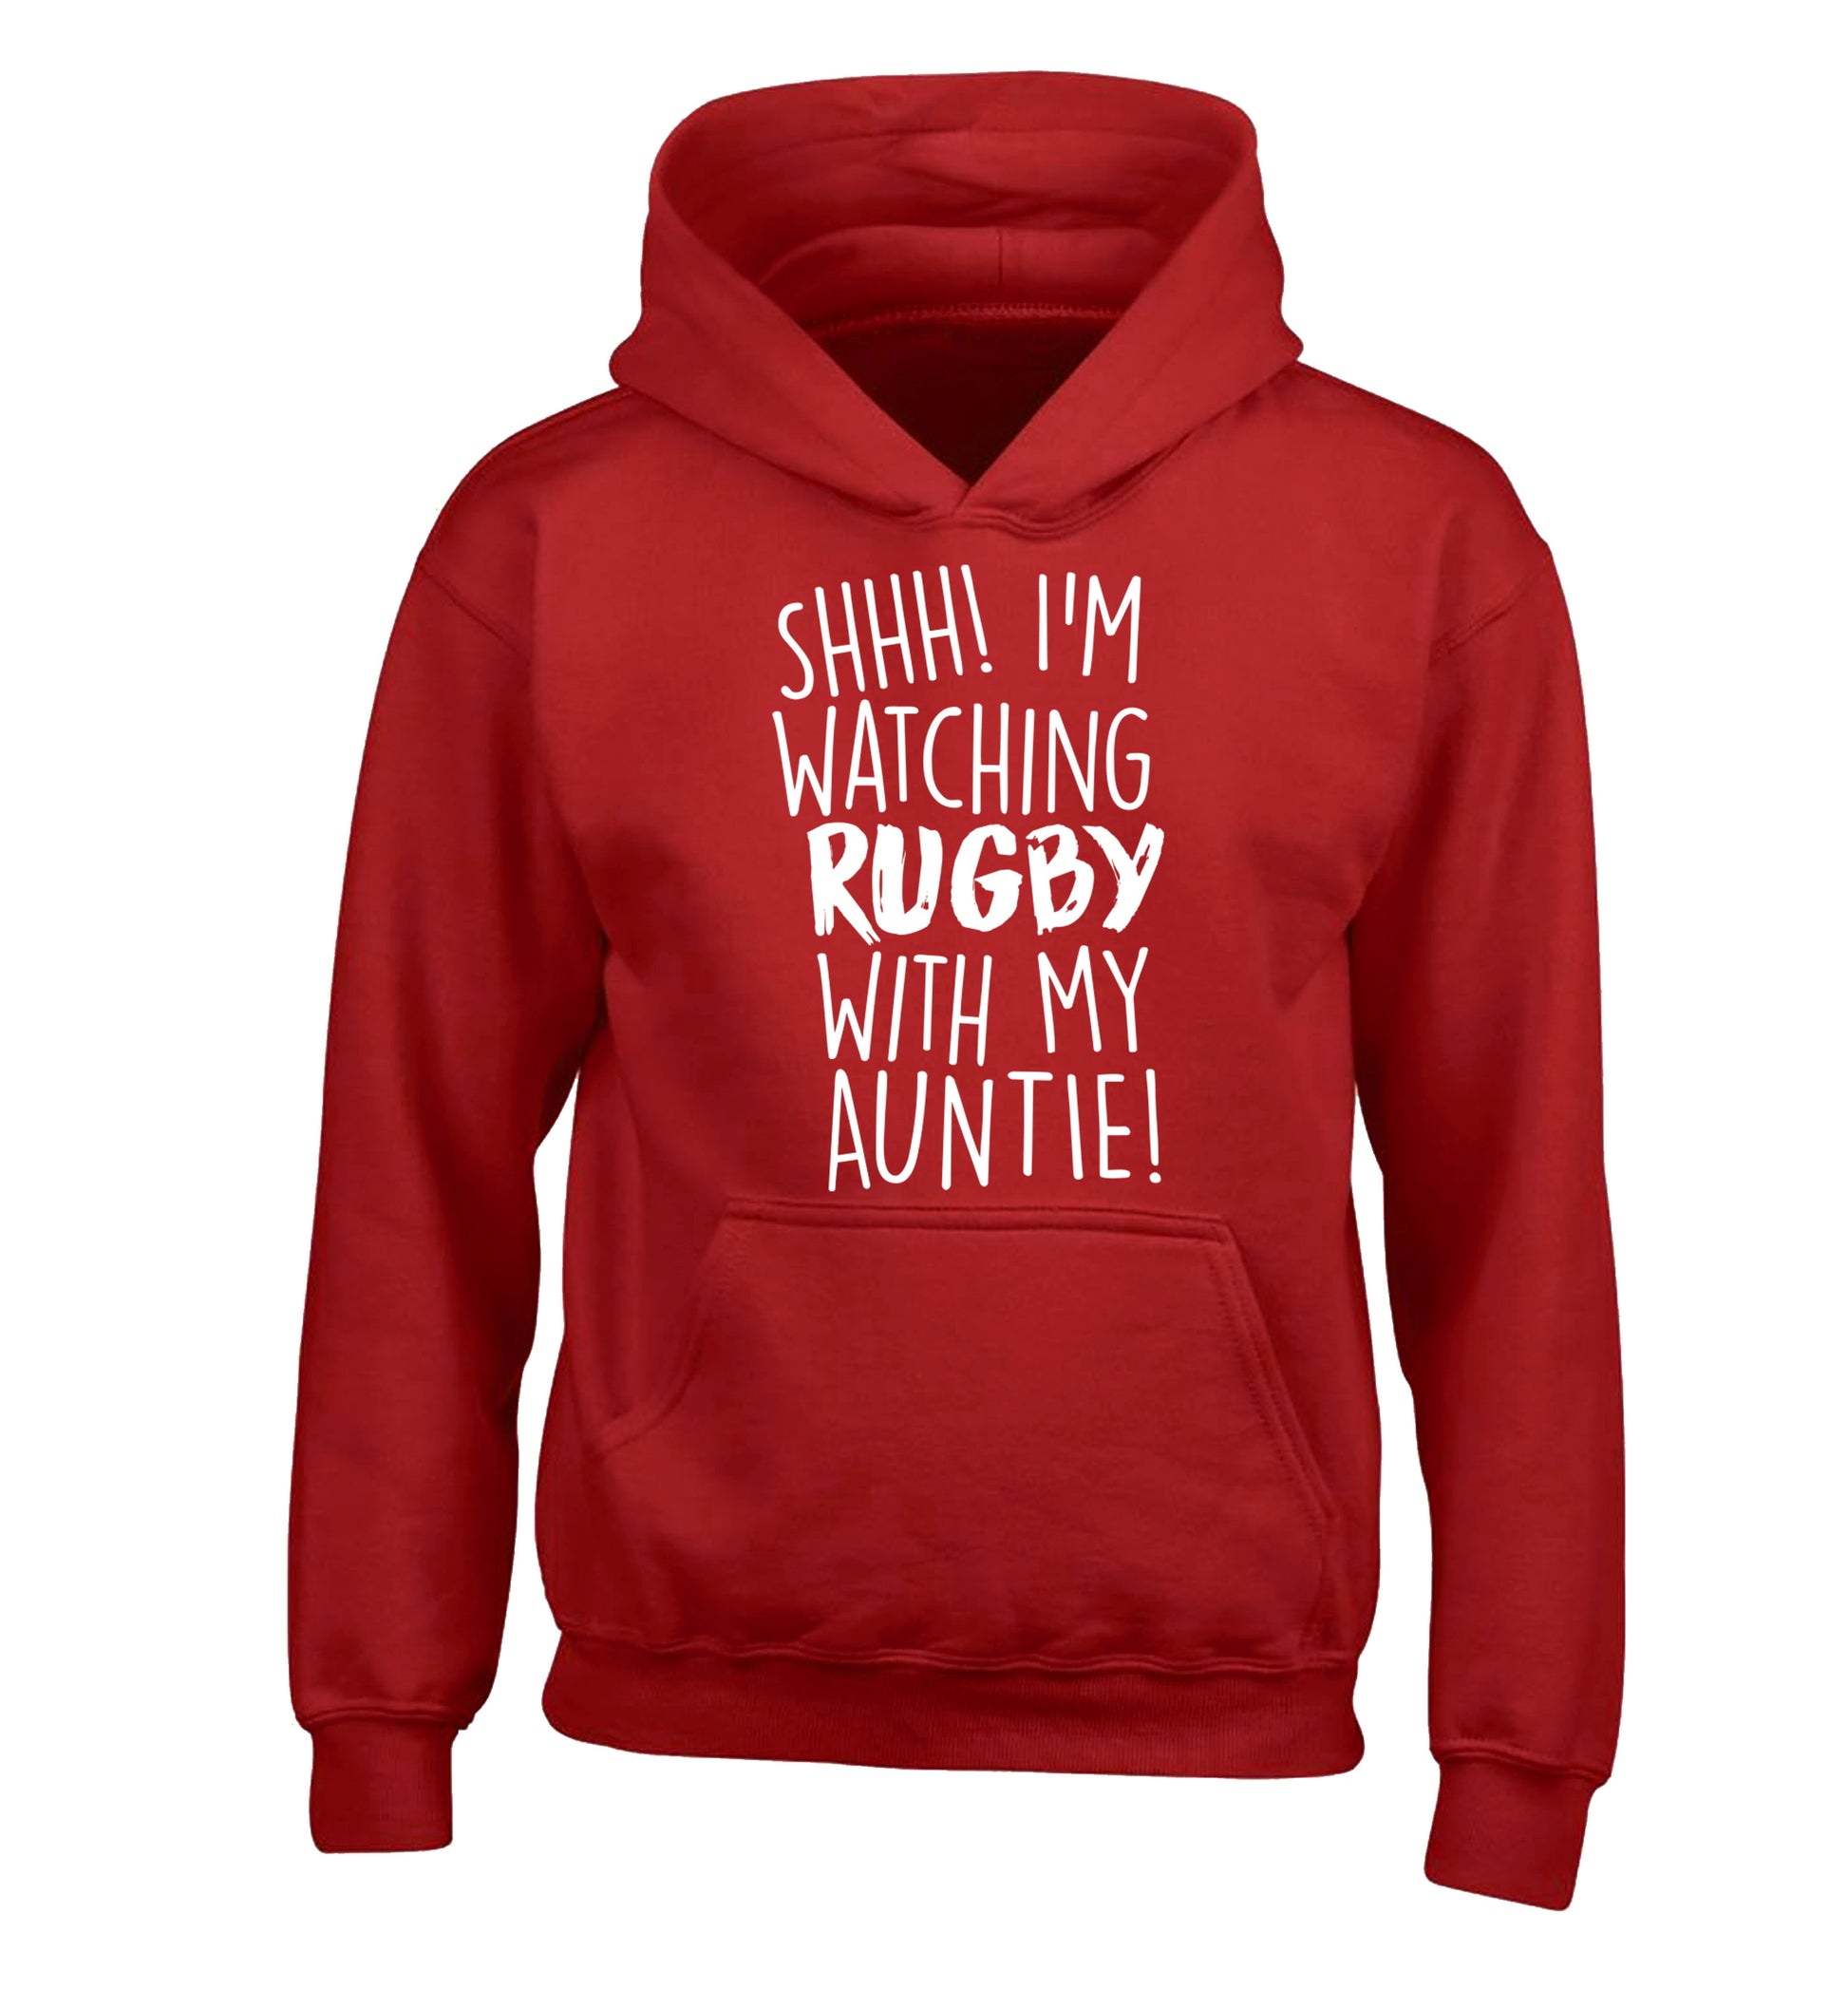 Shhh I'm watchin rugby with my auntie children's red hoodie 12-13 Years